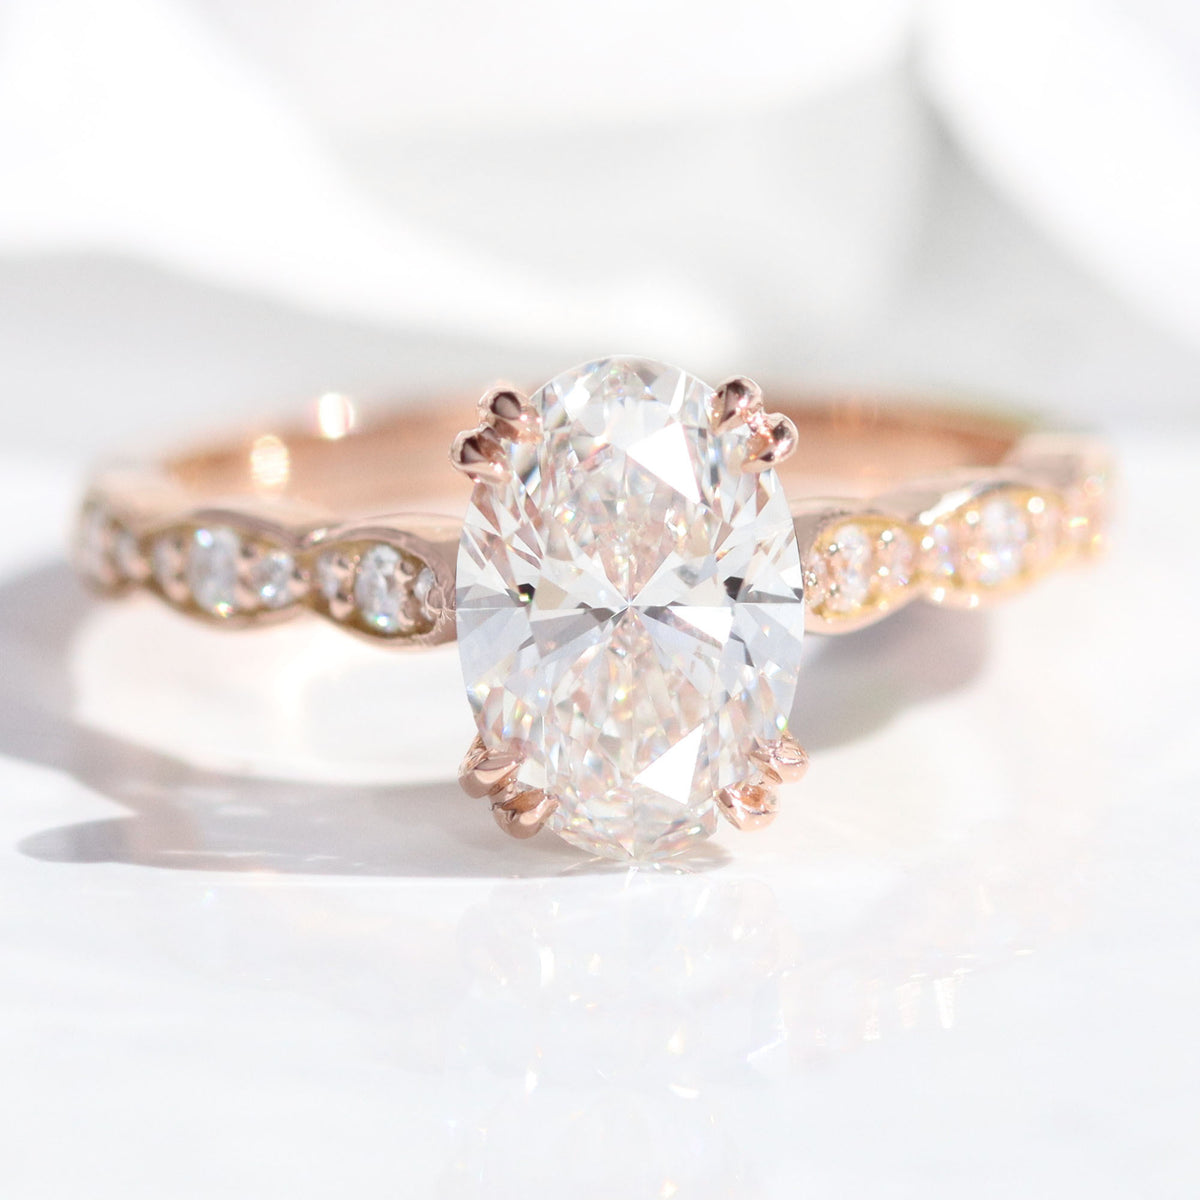 Oval Cut Engagement Rings, Oval Shaped Rings, Oval Bridal Wedding Sets